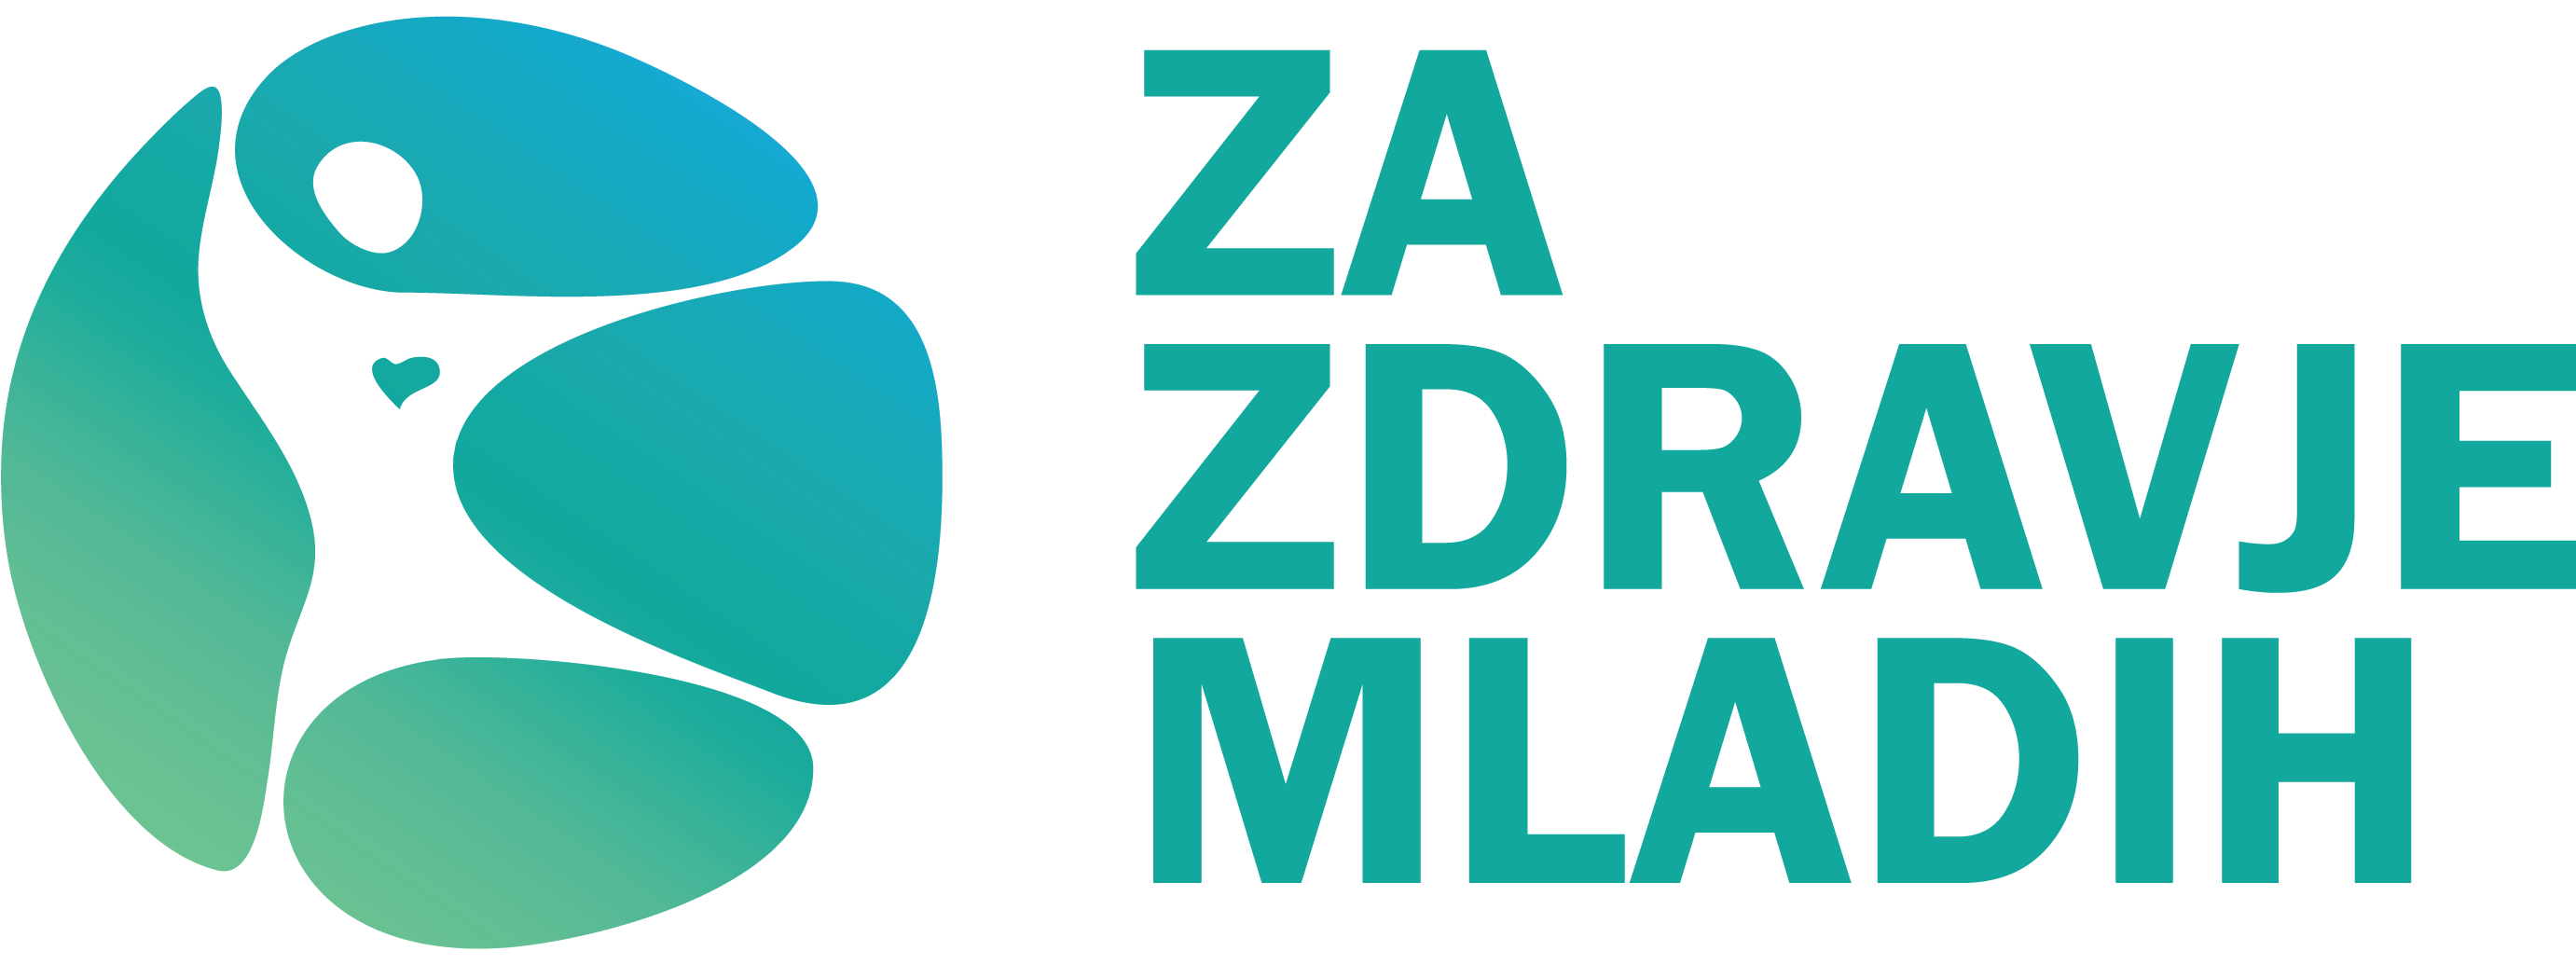 You are currently viewing Za zdravje mladih